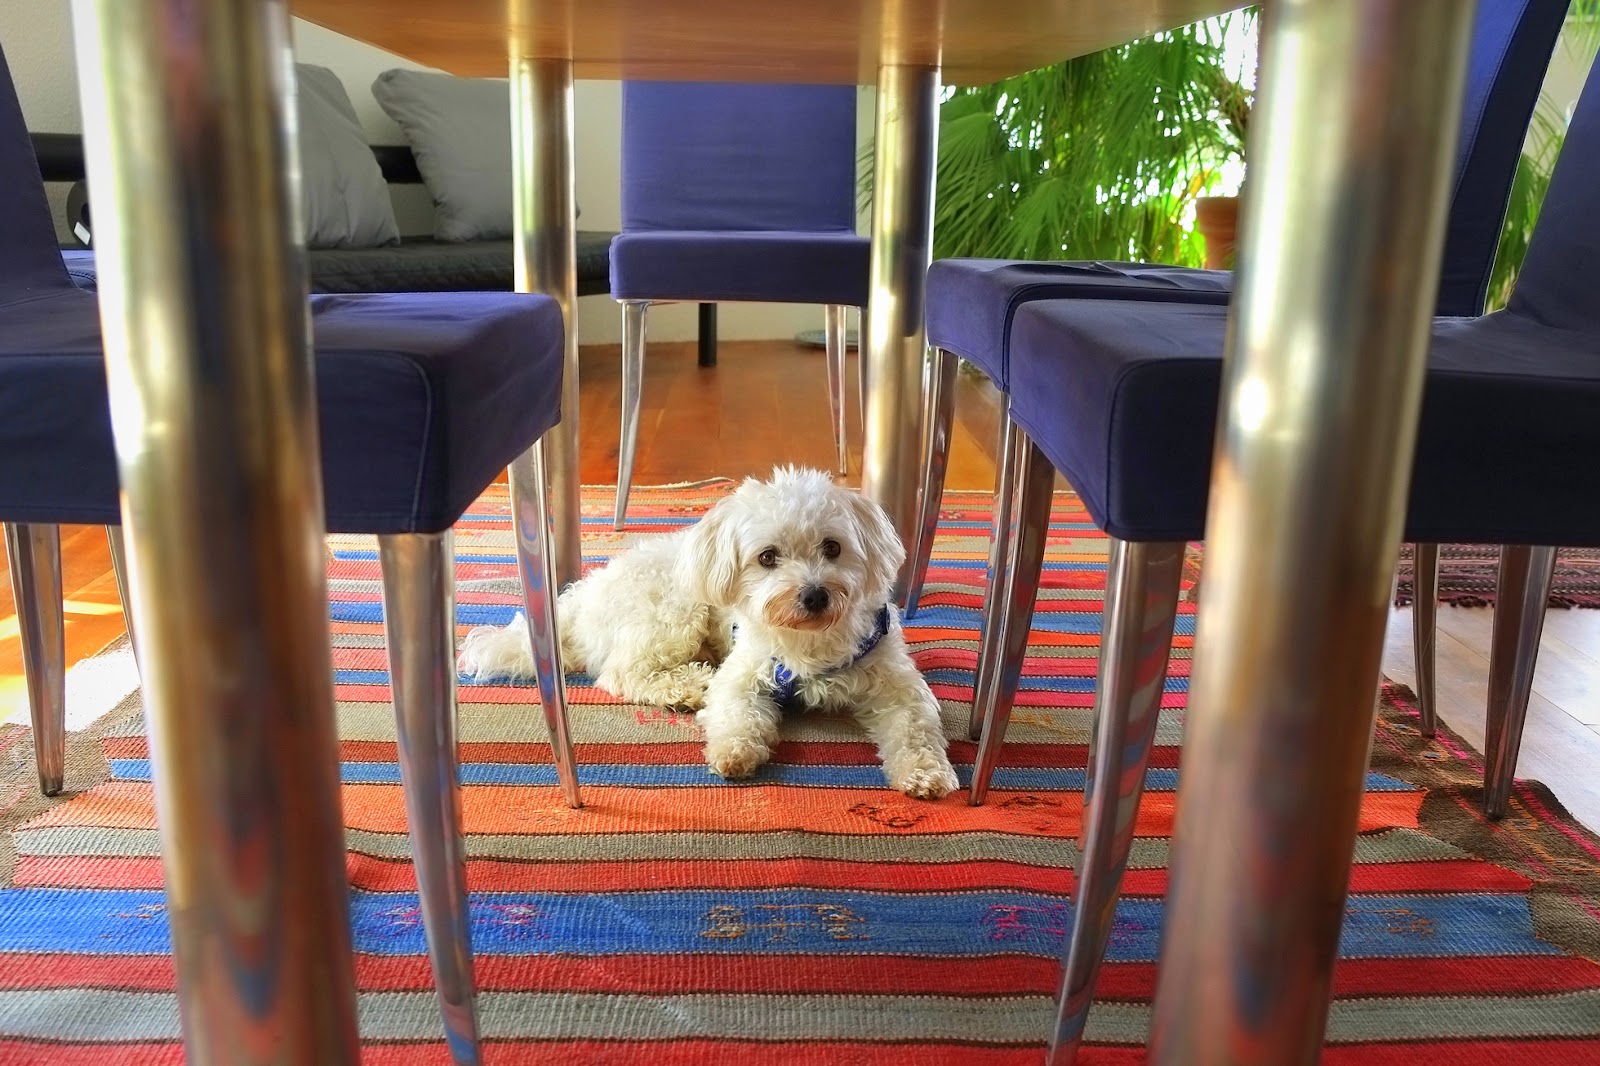 Dog sitting on colorful striped rug